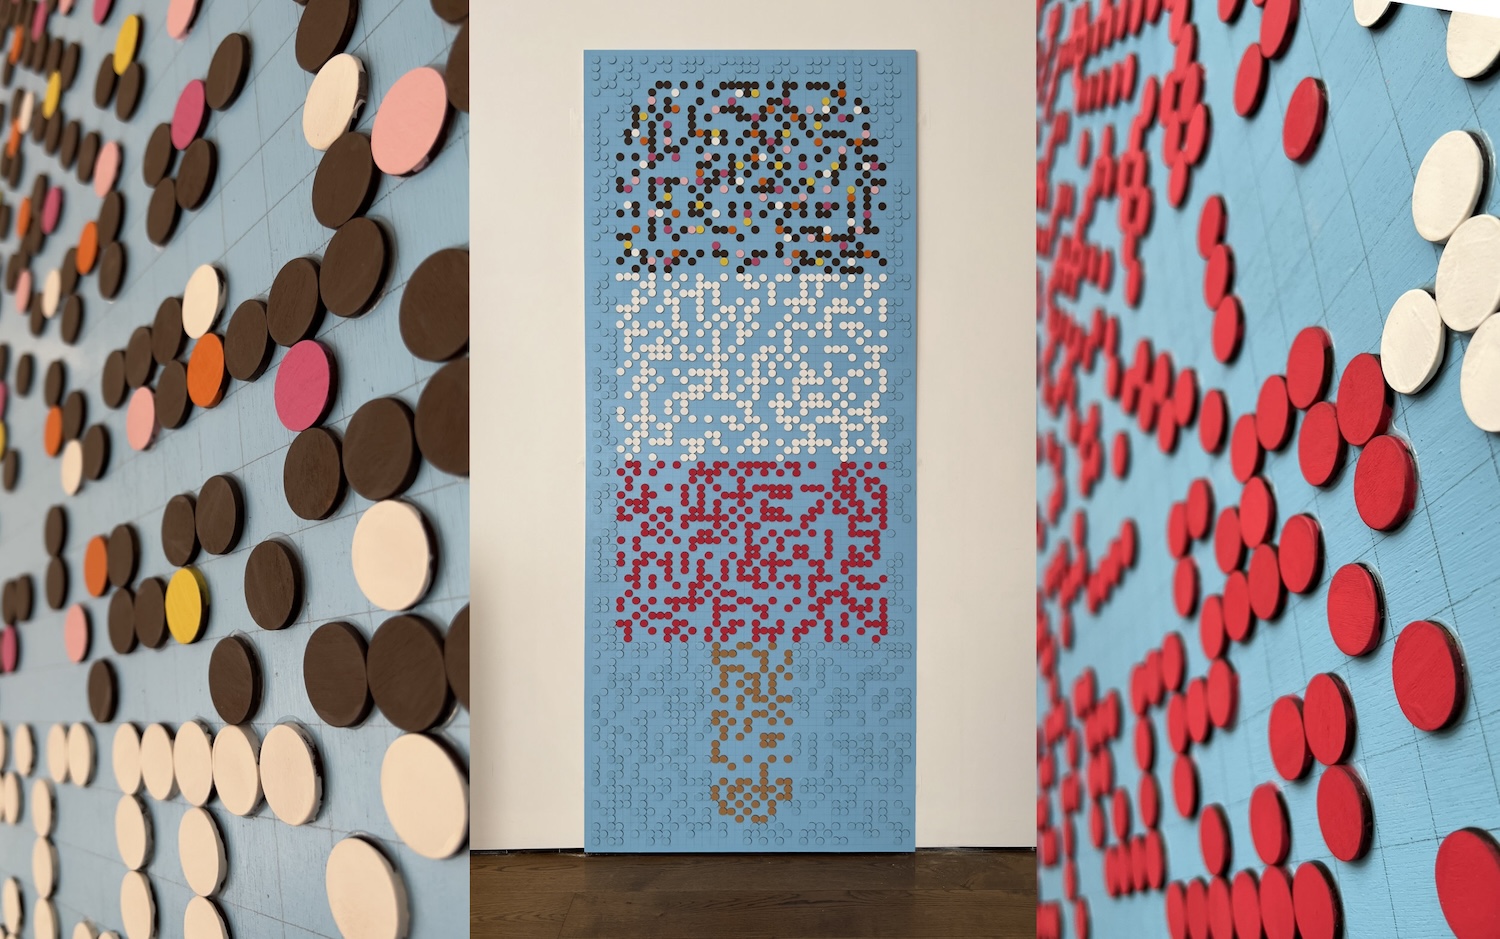 A montage of three perspectives of an artwork made of braille spots in the shape of a Fab lolly. Different colours show the lolly’s chocolate-dipped top, the bands of red and white, and the lolly’s stick.